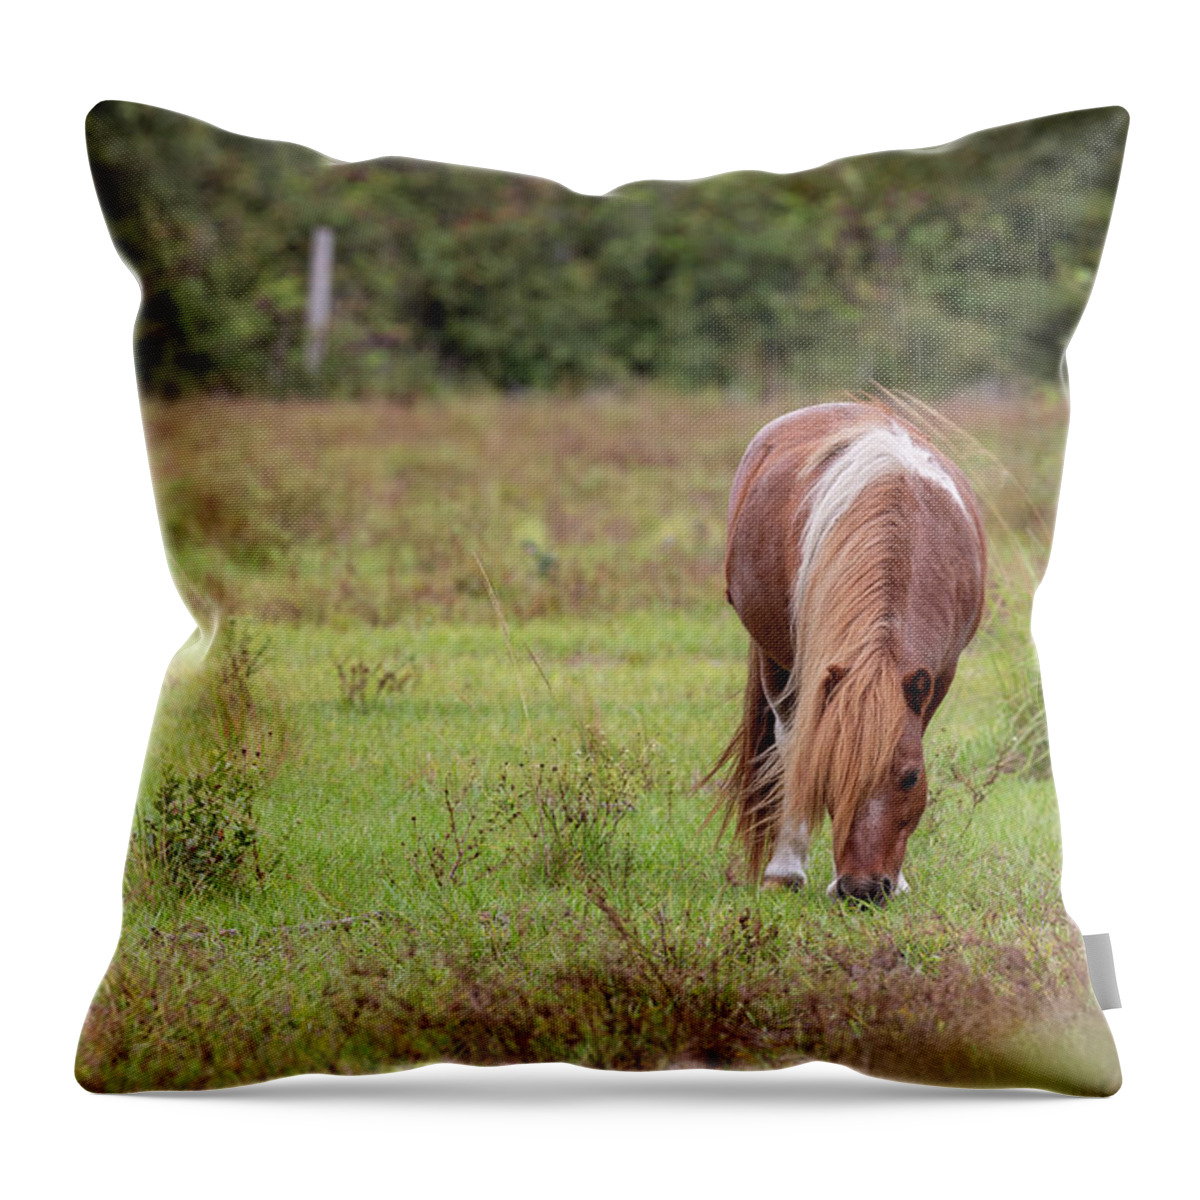 Camping Throw Pillow featuring the photograph Grazing Horse #291 by Michael Fryd